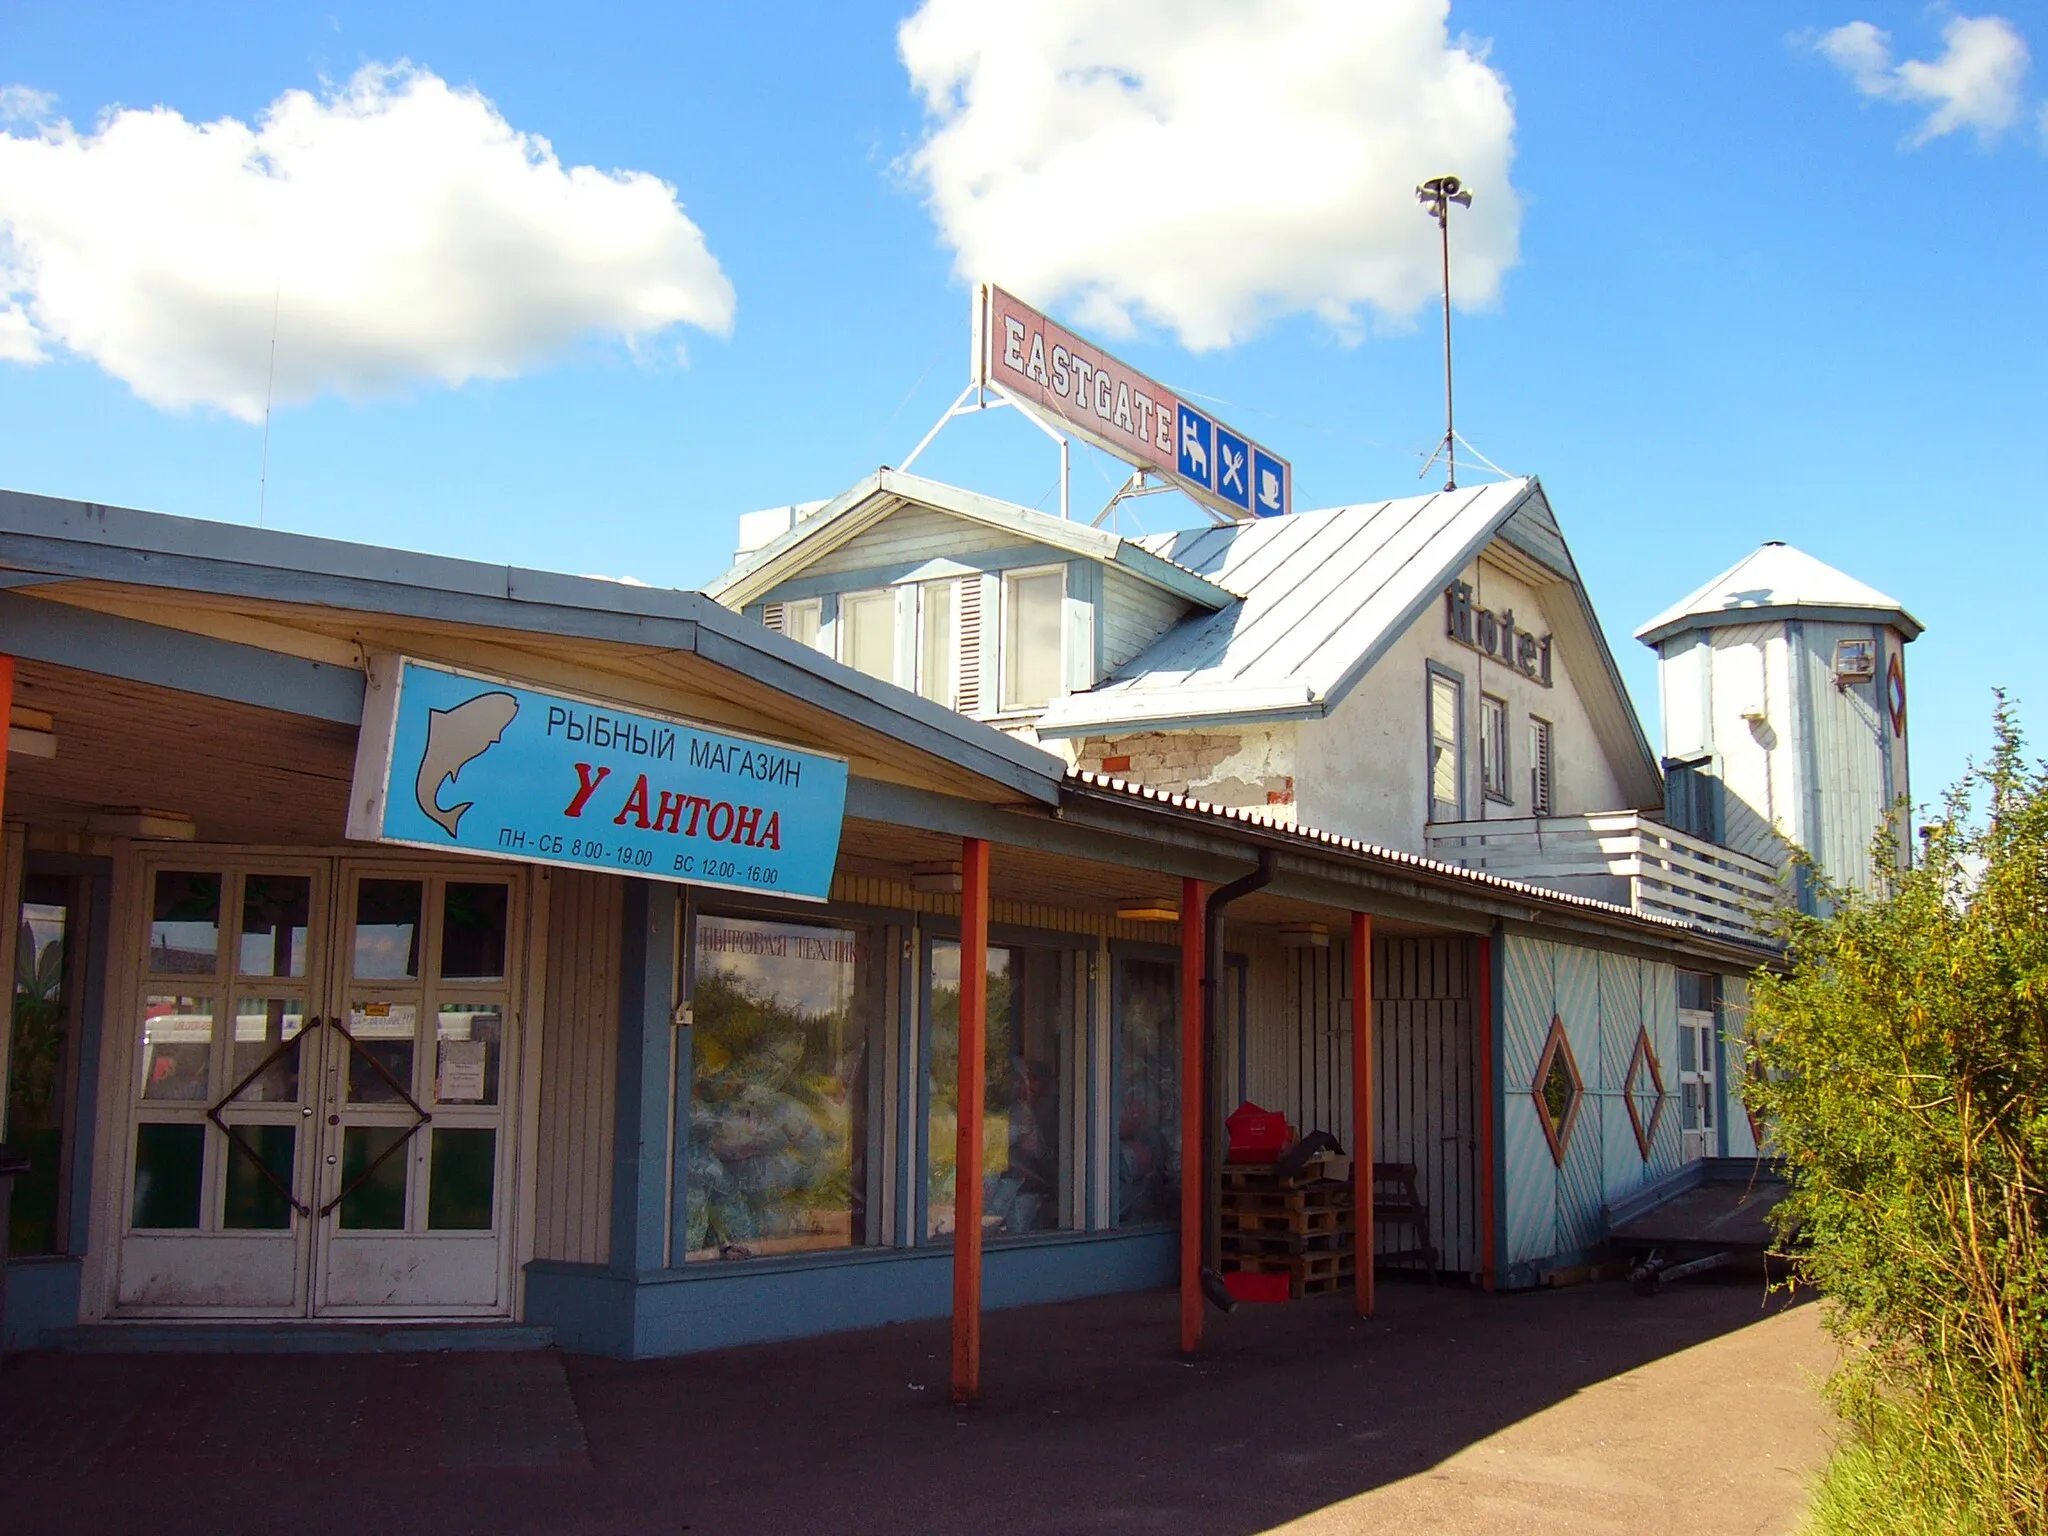 Photo showing: Hotel "Eastgate" and sea-food shop "From Anton's" in Vaalimaa, Finland, along the federal highway 7/E18, near finnish-russian borderline (4 km.).